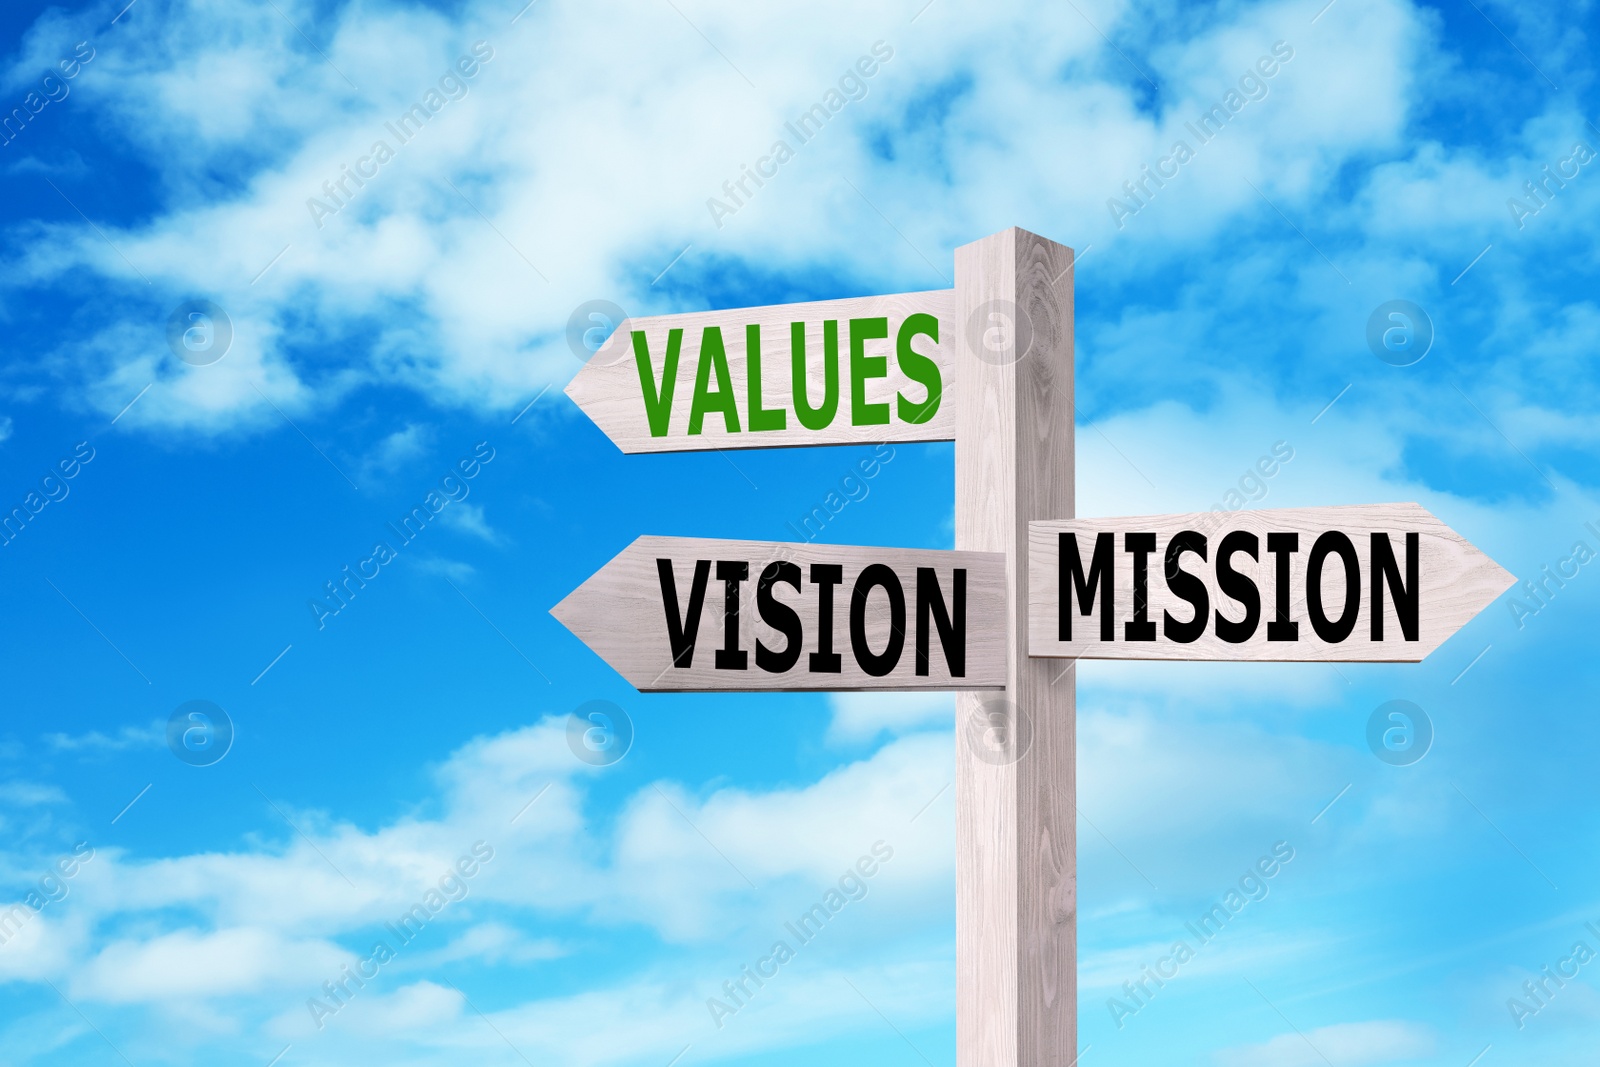 Image of Wooden signpost with Mission, Vision and Values arrows against blue sky